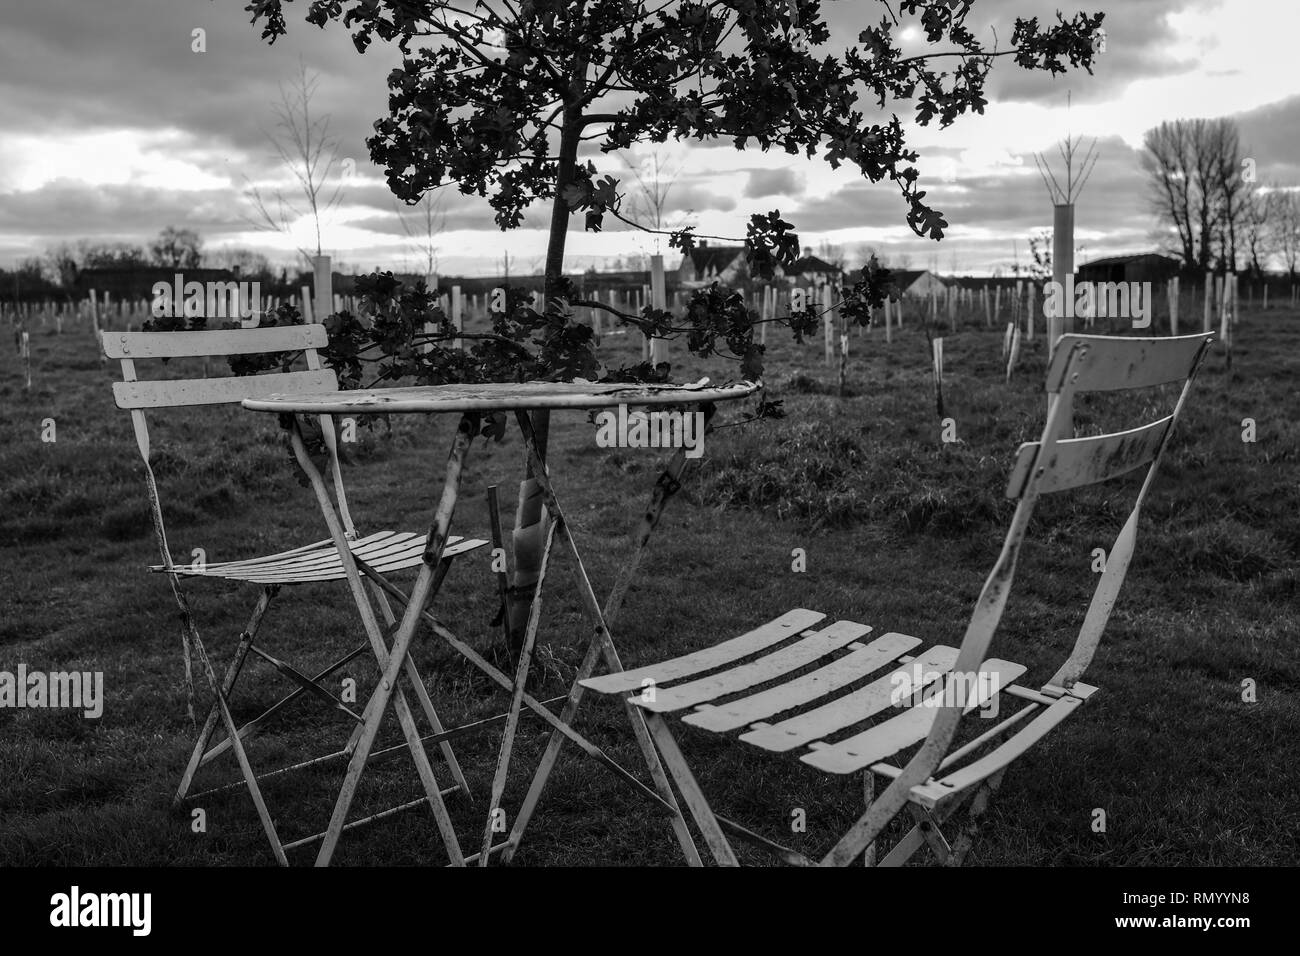 Two garden chairs and rusting table in garden, shot in black and white Stock Photo